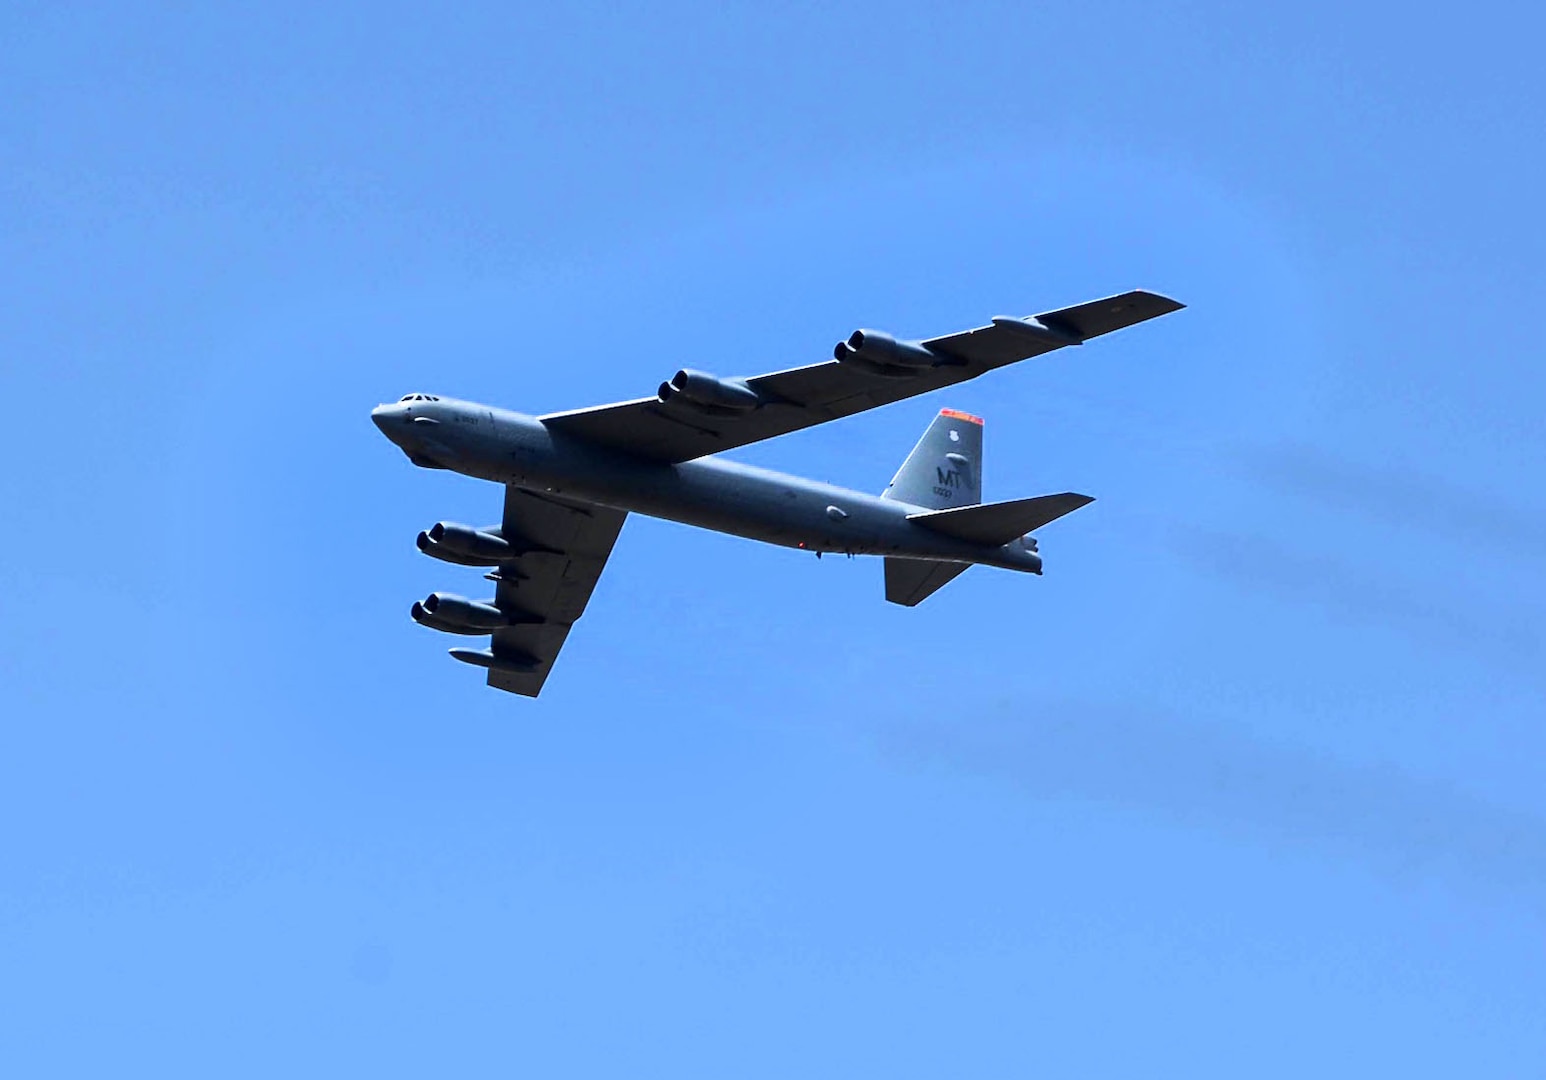 RIONEGRO, Columbia (July 9, 2015) A U.S. Air Force B-52 Stratofortress conducts a flyover demonstration at the Feria Aeronautica Internacional Rionegro (F-AIR) Colombia 2015 International Air Show, July 9, 2015 in Rionegro, Colombia. The aircraft, assigned to the 5th Bomb Wing at Minot Air Force Base, N.D., conducted the flyover as part of a training mission to the U.S. Southern Command (USSOUTHCOM) area of responsibility, which was closely coordinated with the Colombian Ministry of National Defense. "The aircraft's participation in this airshow and the training conducted alongside our Colombian partners allow our strategic aircrews to maintain a high state of readiness and crew proficiency," said Commander, U.S. Strategic Command (USSTRATCOM), U.S. Navy Adm. Cecil D. Haney. USSTRATCOM is one of nine DoD unified combatant commands and is charged with strategic deterrence; space operations; cyberspace operations; joint electronic warfare; global strike; missile defense; intelligence, surveillance and reconnaissance; combating weapons of mass destruction; and analysis and targeting. (U.S. Air Force photo by MSgt. Kristina Newton/Released)